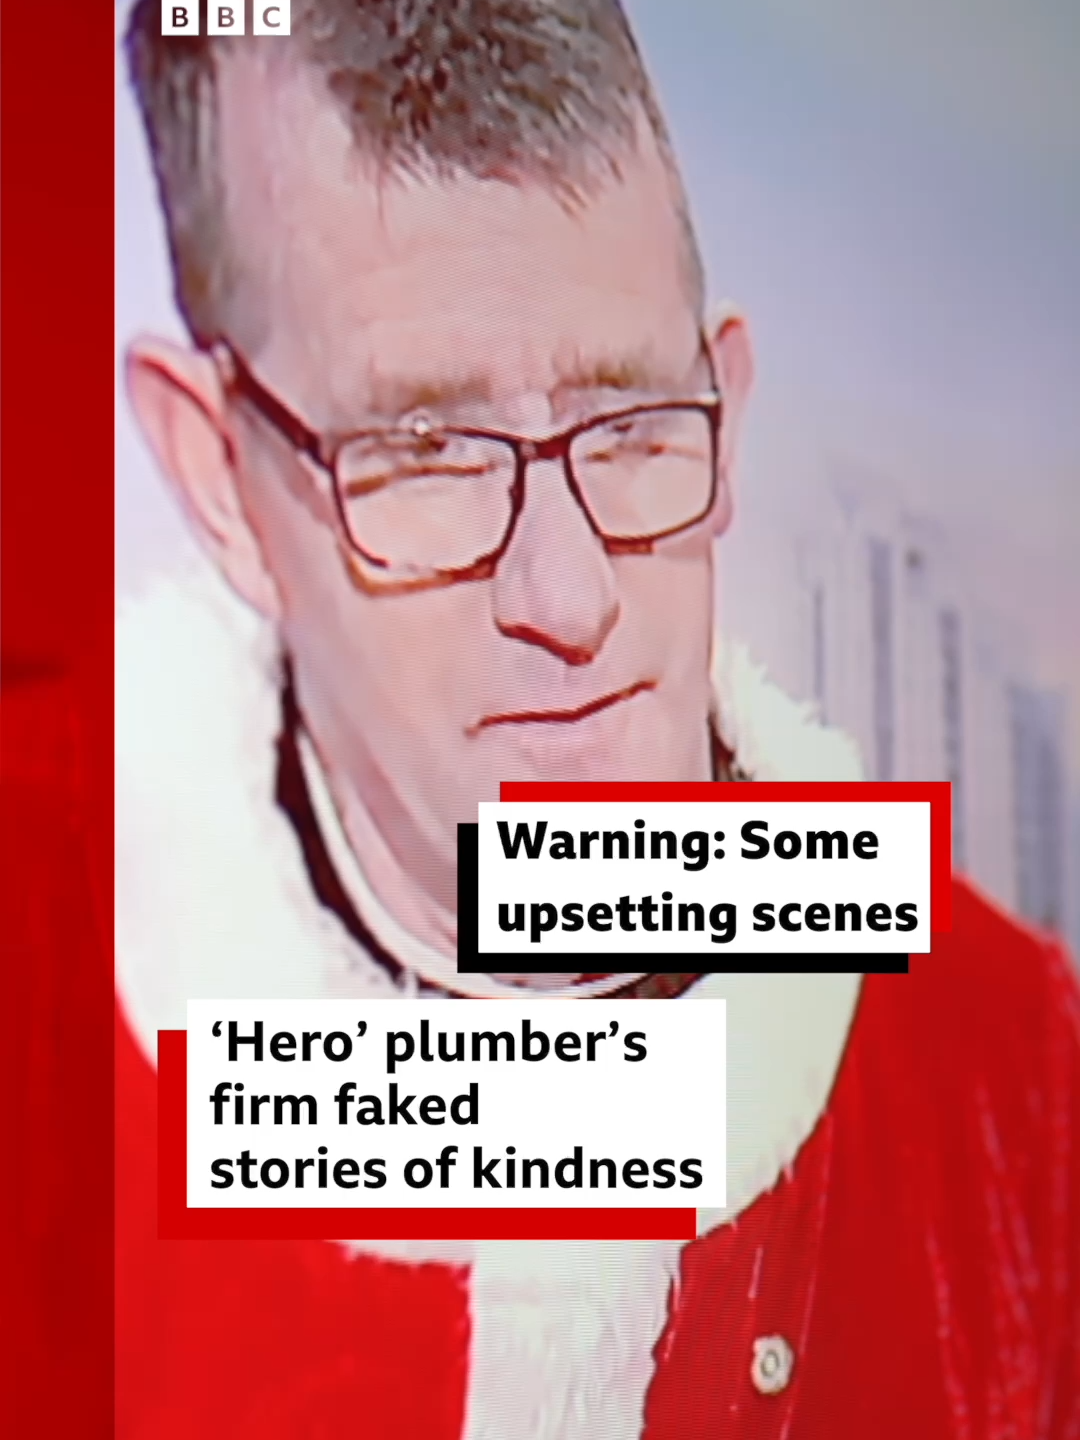 The BBC confronted "Britain's kindest plumber", after our investigation revealed the firm run by James Anderson faked stories of helping people, as it raised millions in donations. #Plumber #JamesAnderson #Depher #PlumbersOfTiktok #Donation #Donations #Burnley #Community #News #Investigation #BBCNews